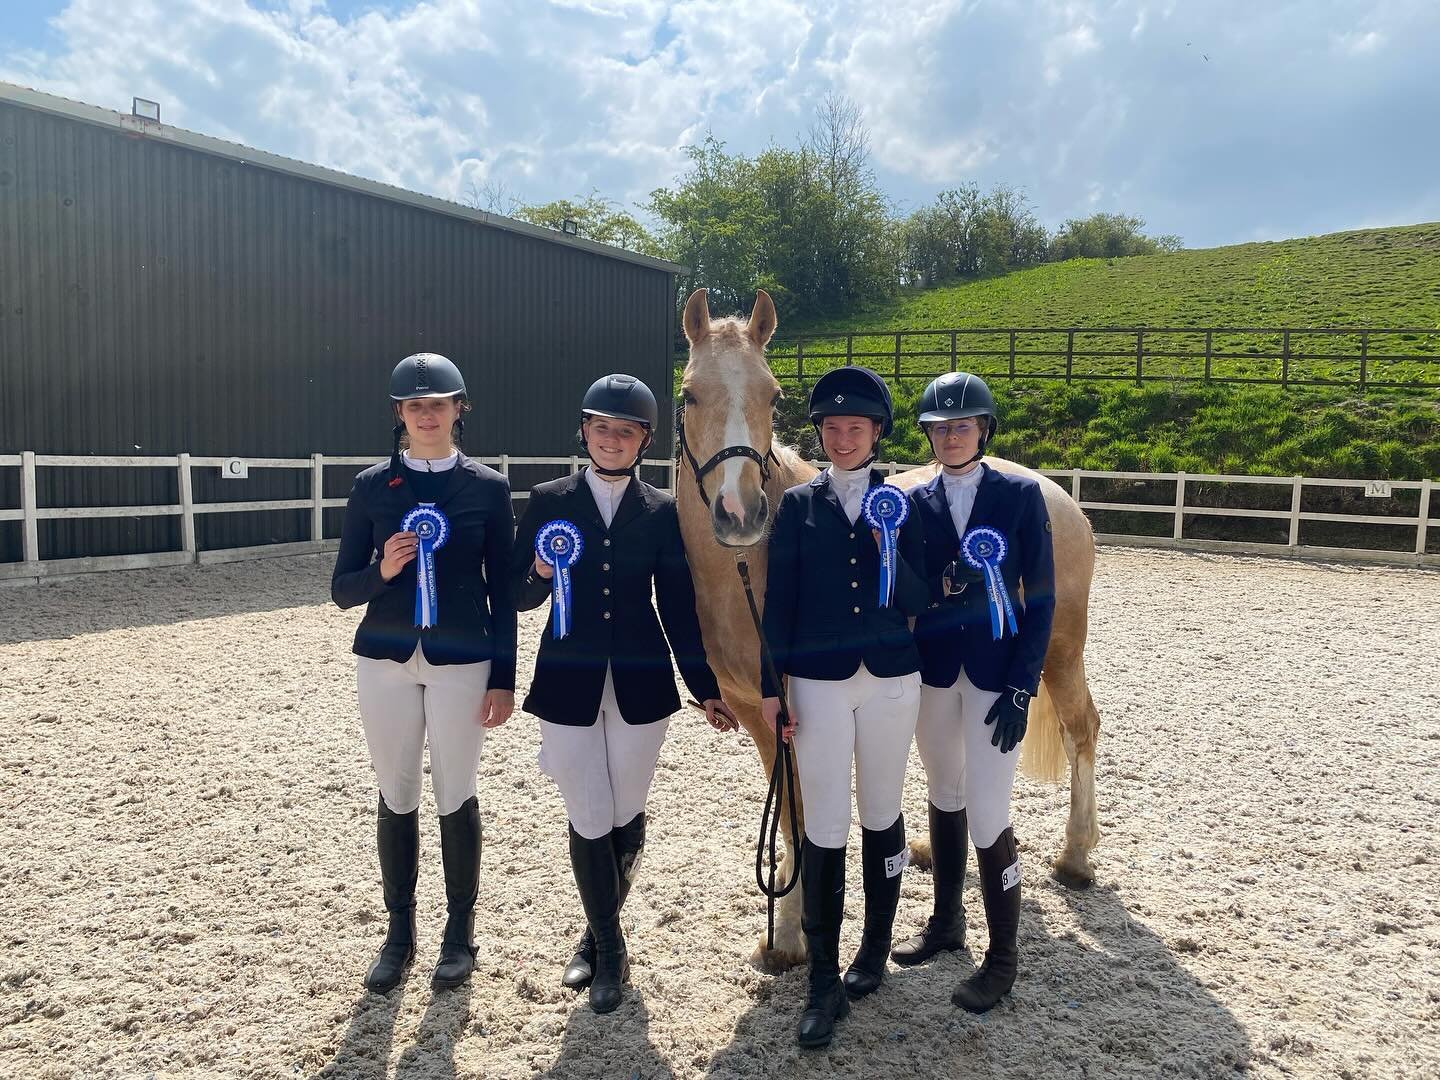 Well done to our C team who came team second today at regionals 🥈
Ellen and Elise also smashed it individually to come first and third 🥇🥉
A lovely day all round (with some typical BUCS moments added for some extra fun! 🙈)
Congratulations to @stra